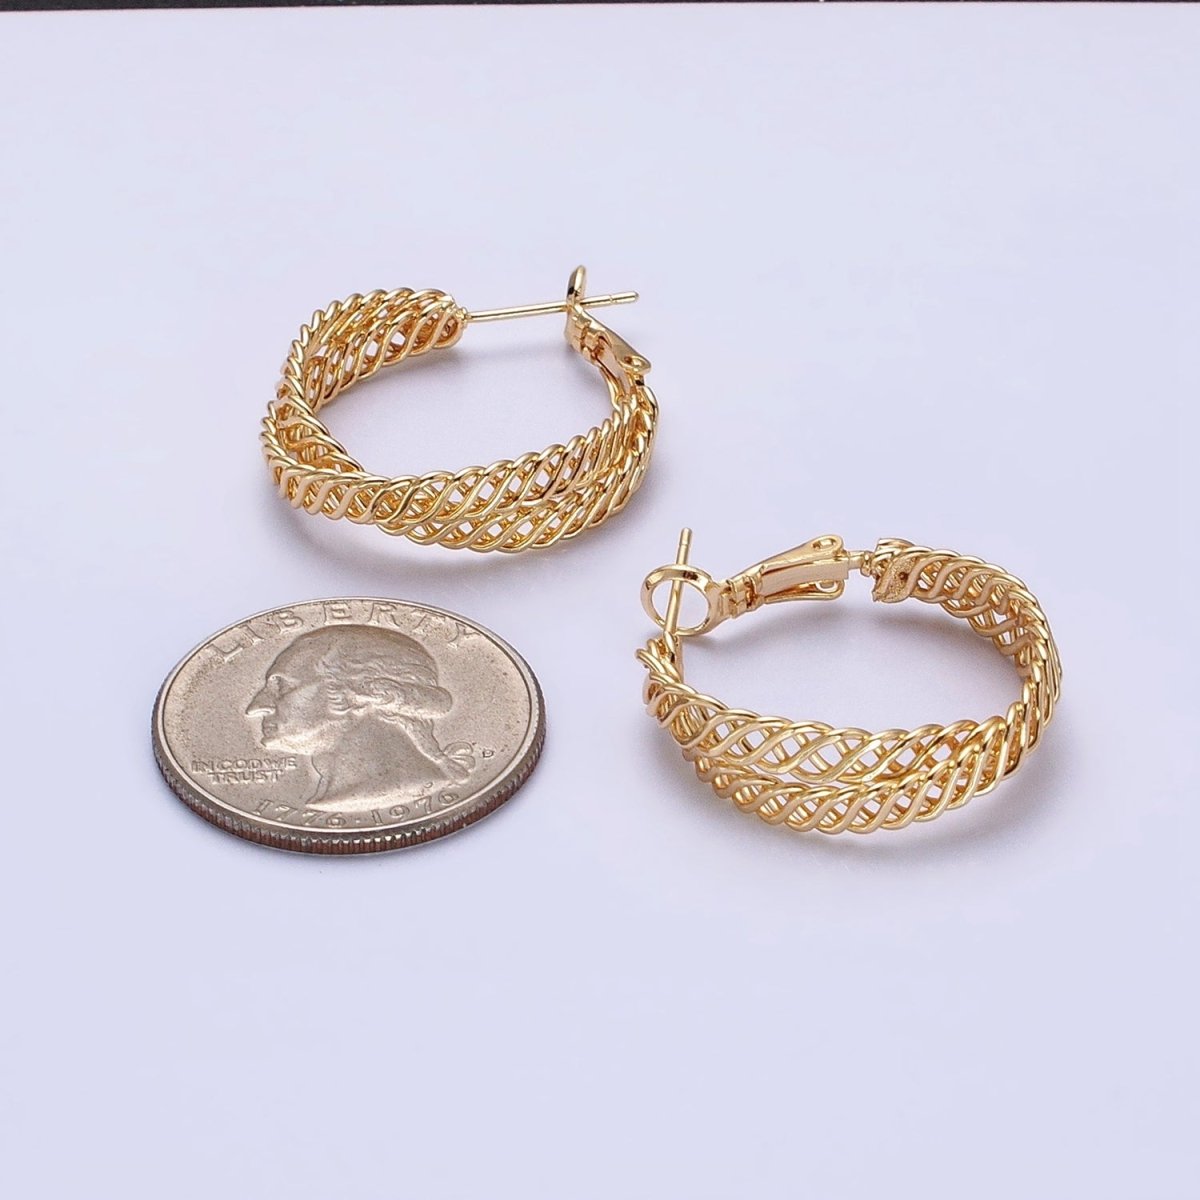 ,Silver, Gold 25mm Open Braided Woven Chain Link Hinge Hoop Earrings | AB932 AB936 - DLUXCA